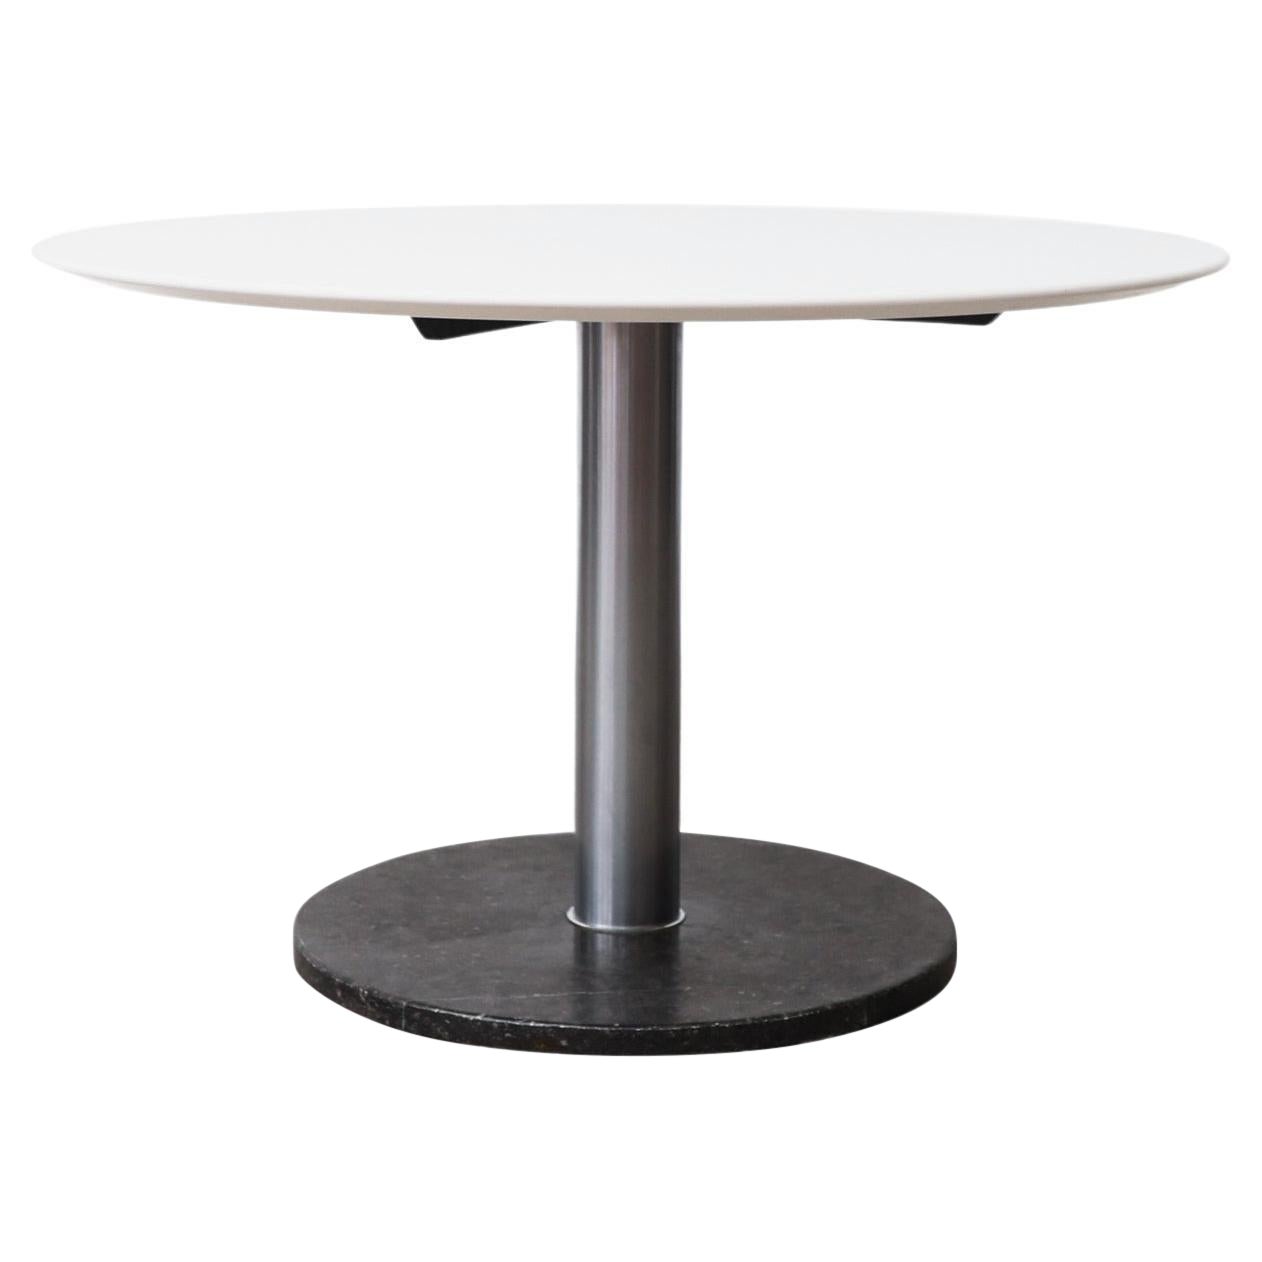 Pedestal Dining Table with Black Marble Base, Chrome Stem, & White Laminate Top